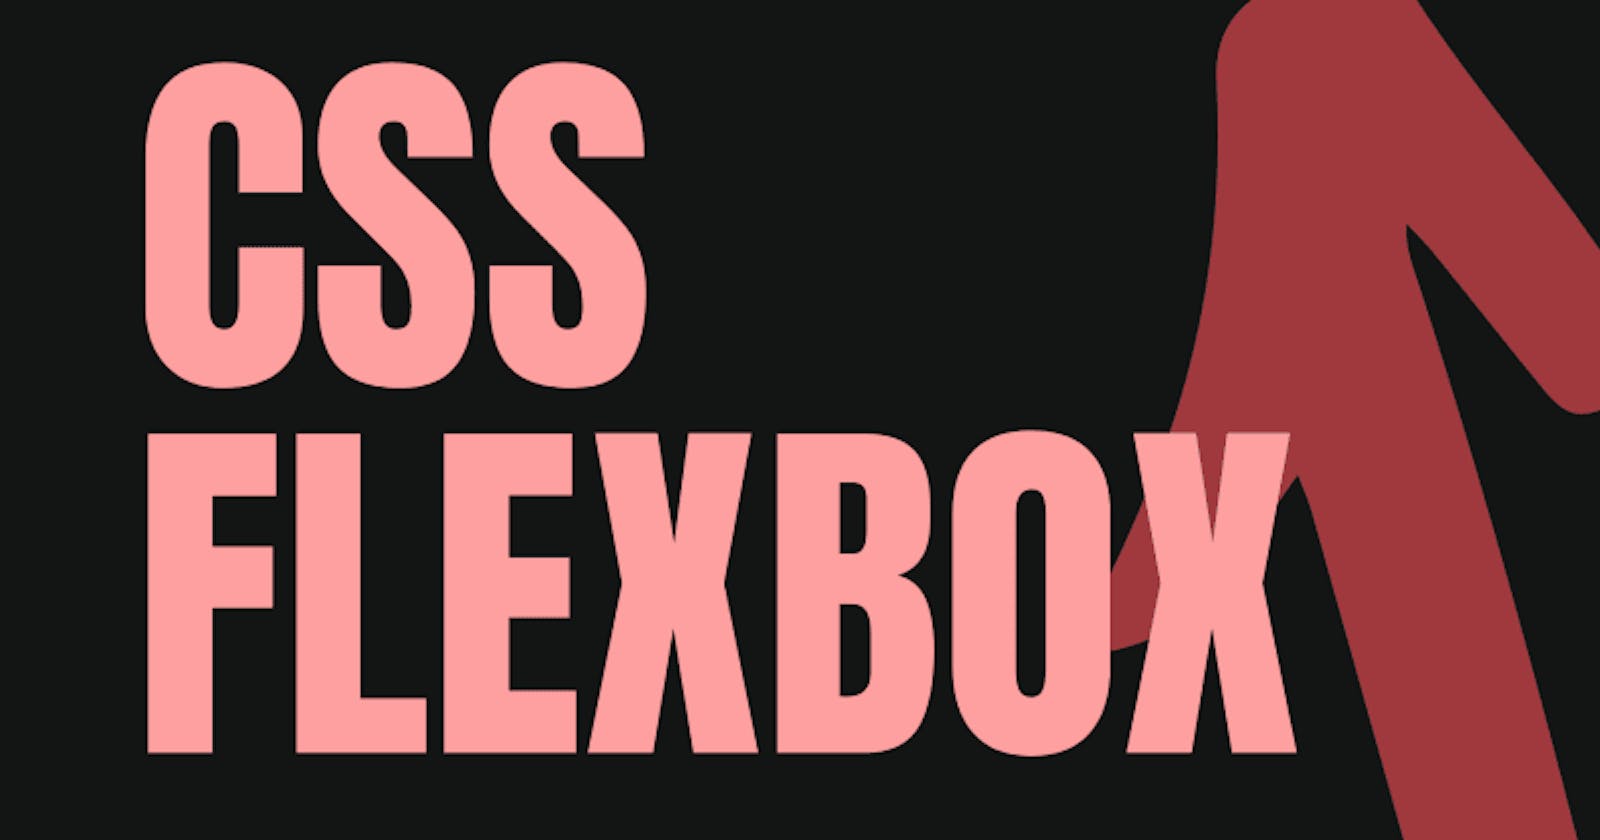 A beginners guide to CSS flexbox - part one